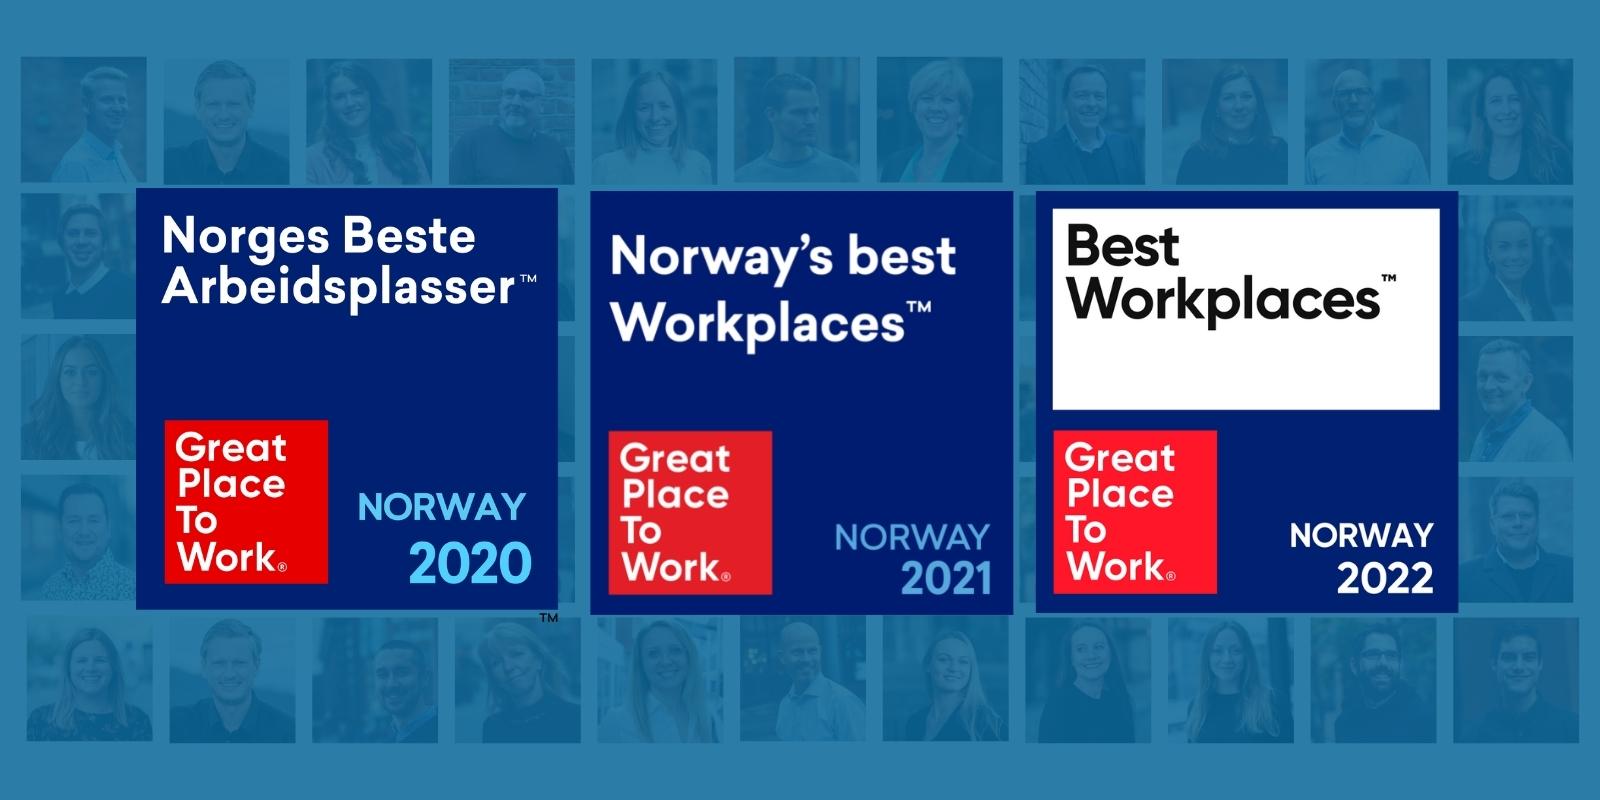 Being one of Europe's best workplaces 3 years in a row